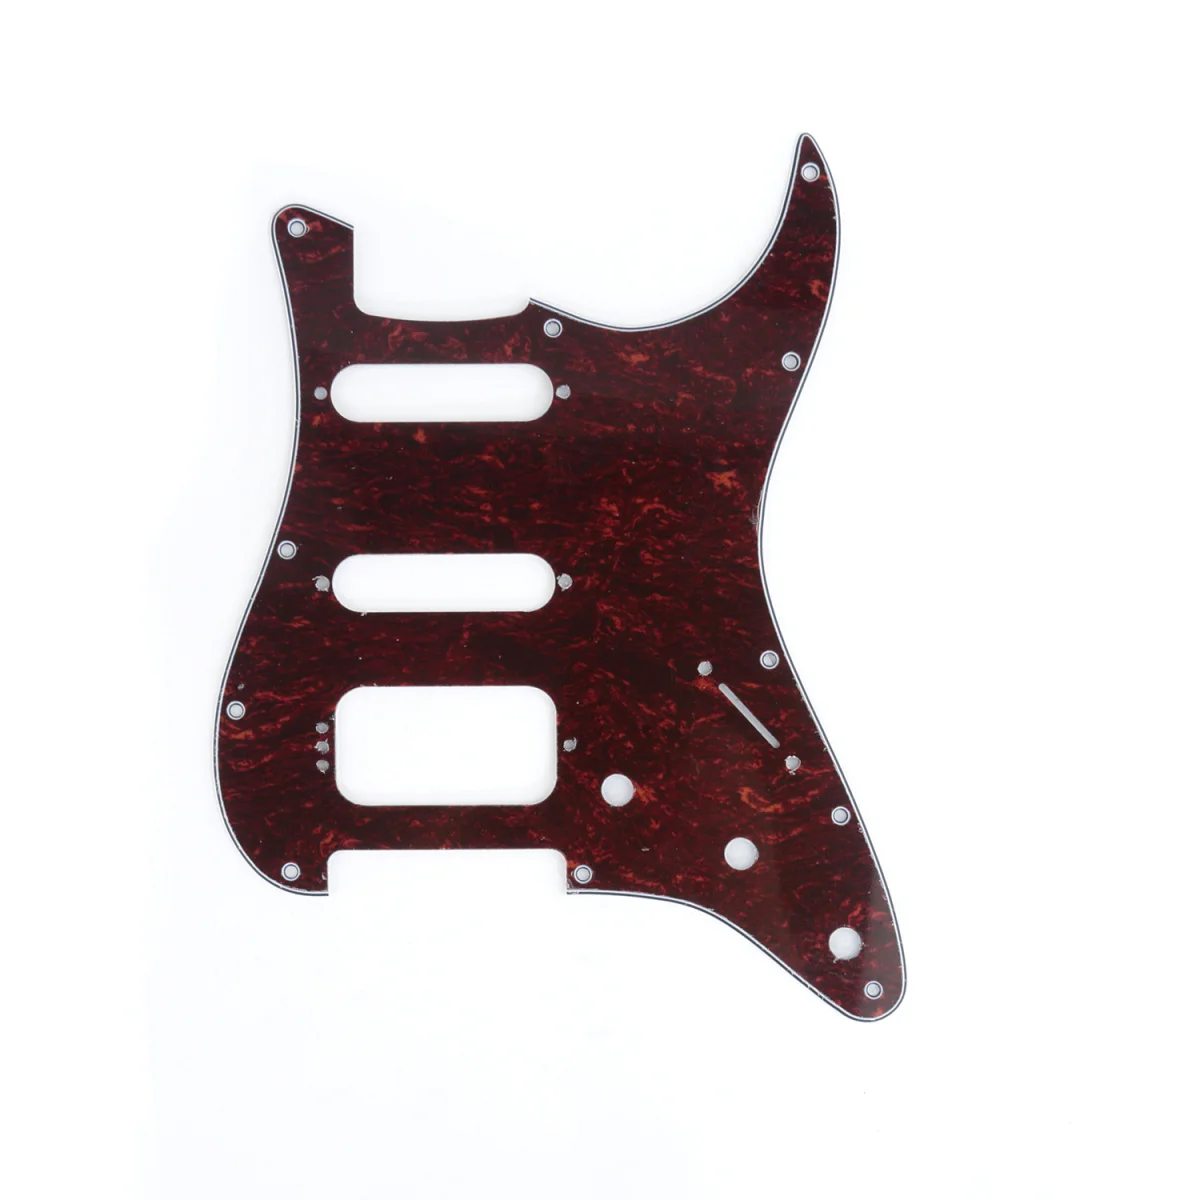 

Musiclily Pro 11-Hole Round Corner HSS Guitar Strat Pickguard for USA/Mexican Strat 4-screw Humbucking Pickup, 4Ply Red Tortoise